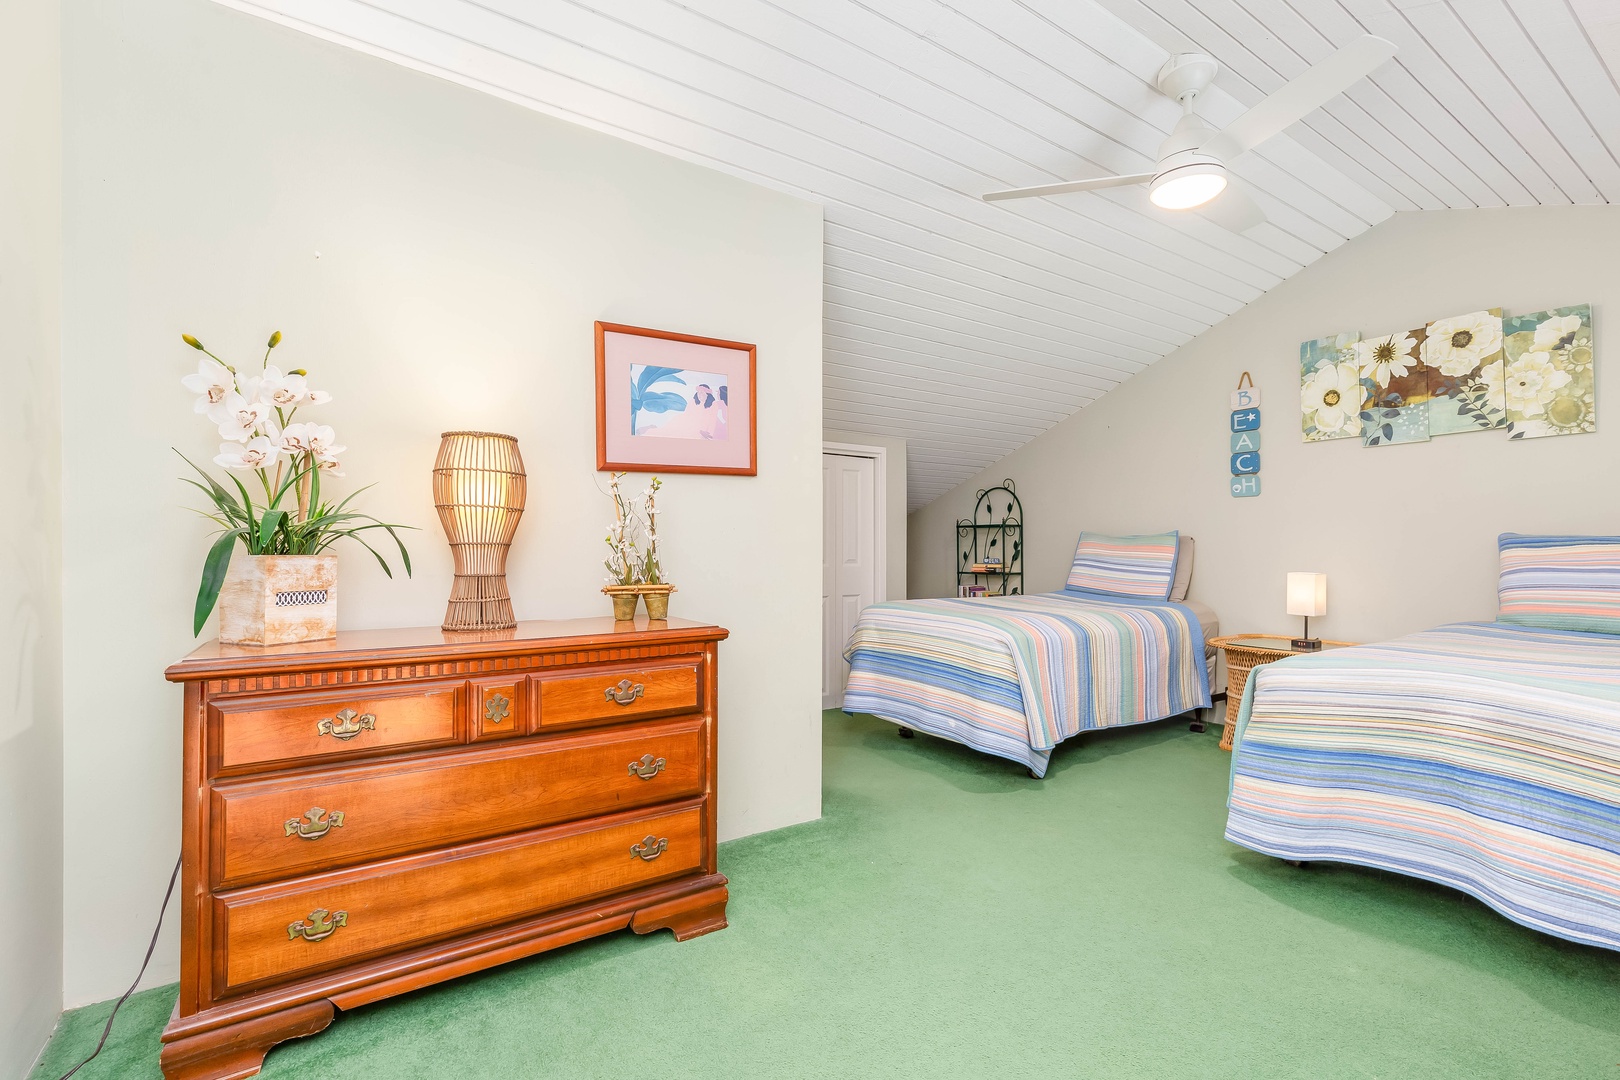 Kahuku Vacation Rentals, Ilima West Kuilima Estates #18 at Turtle Bay - Loft beds perfect for the little ones!